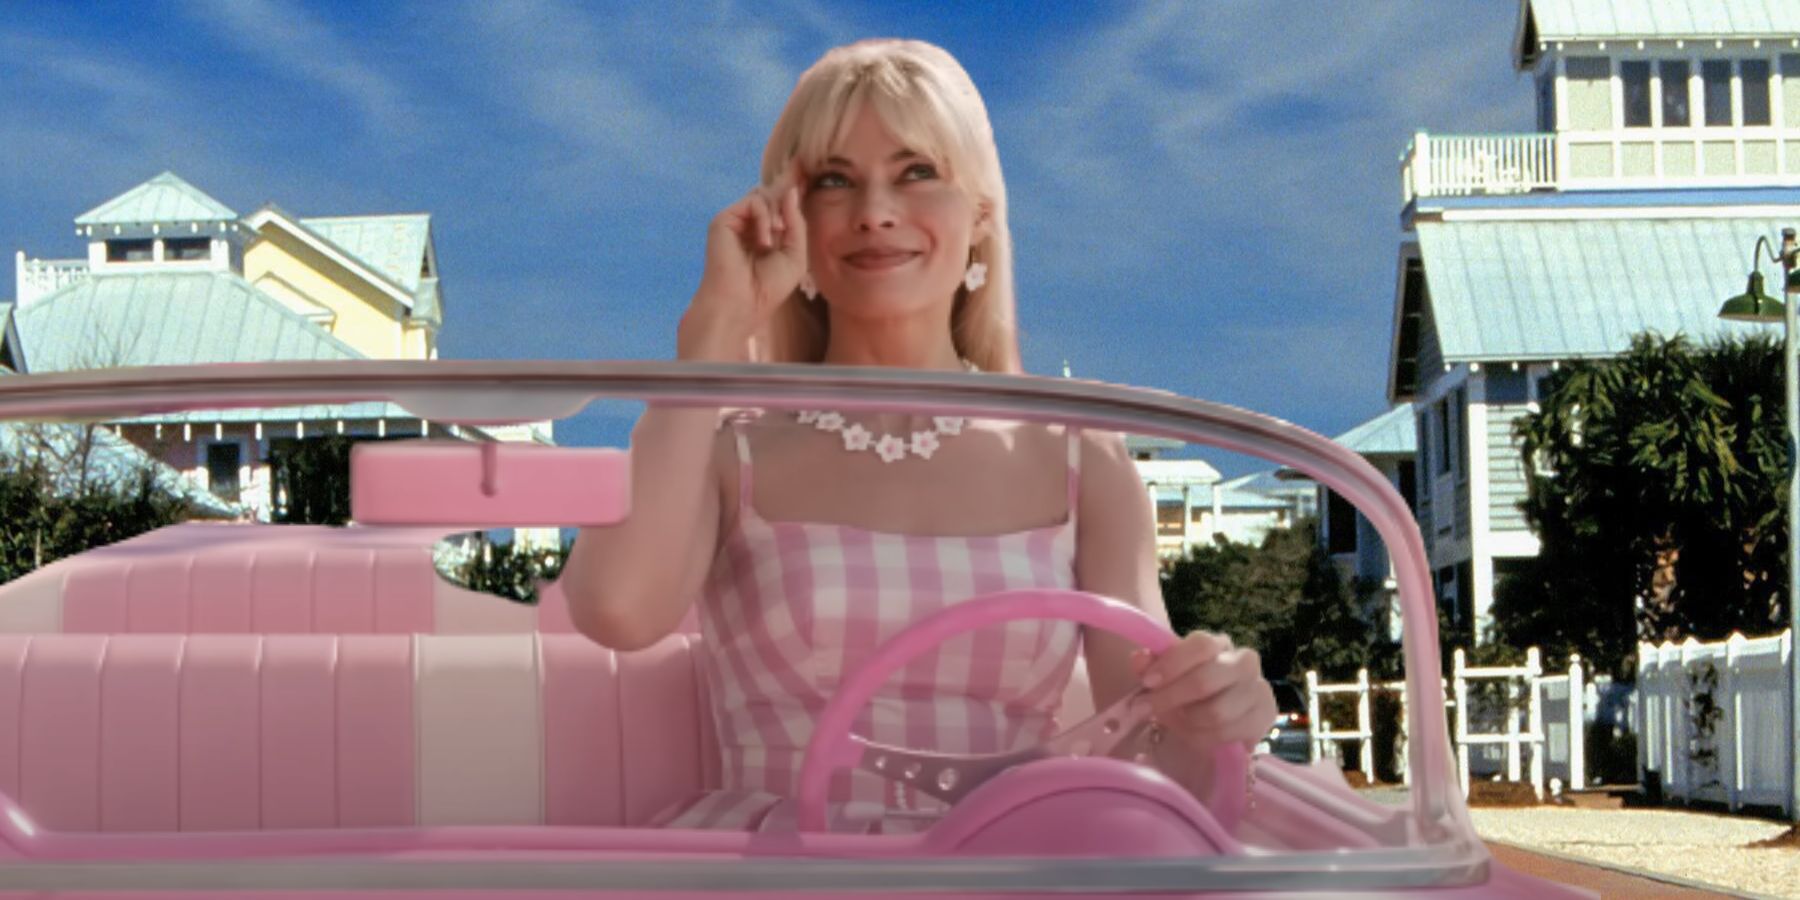 Barbie's Pink Utopia Resembles Another Scenic Movie Destination ...